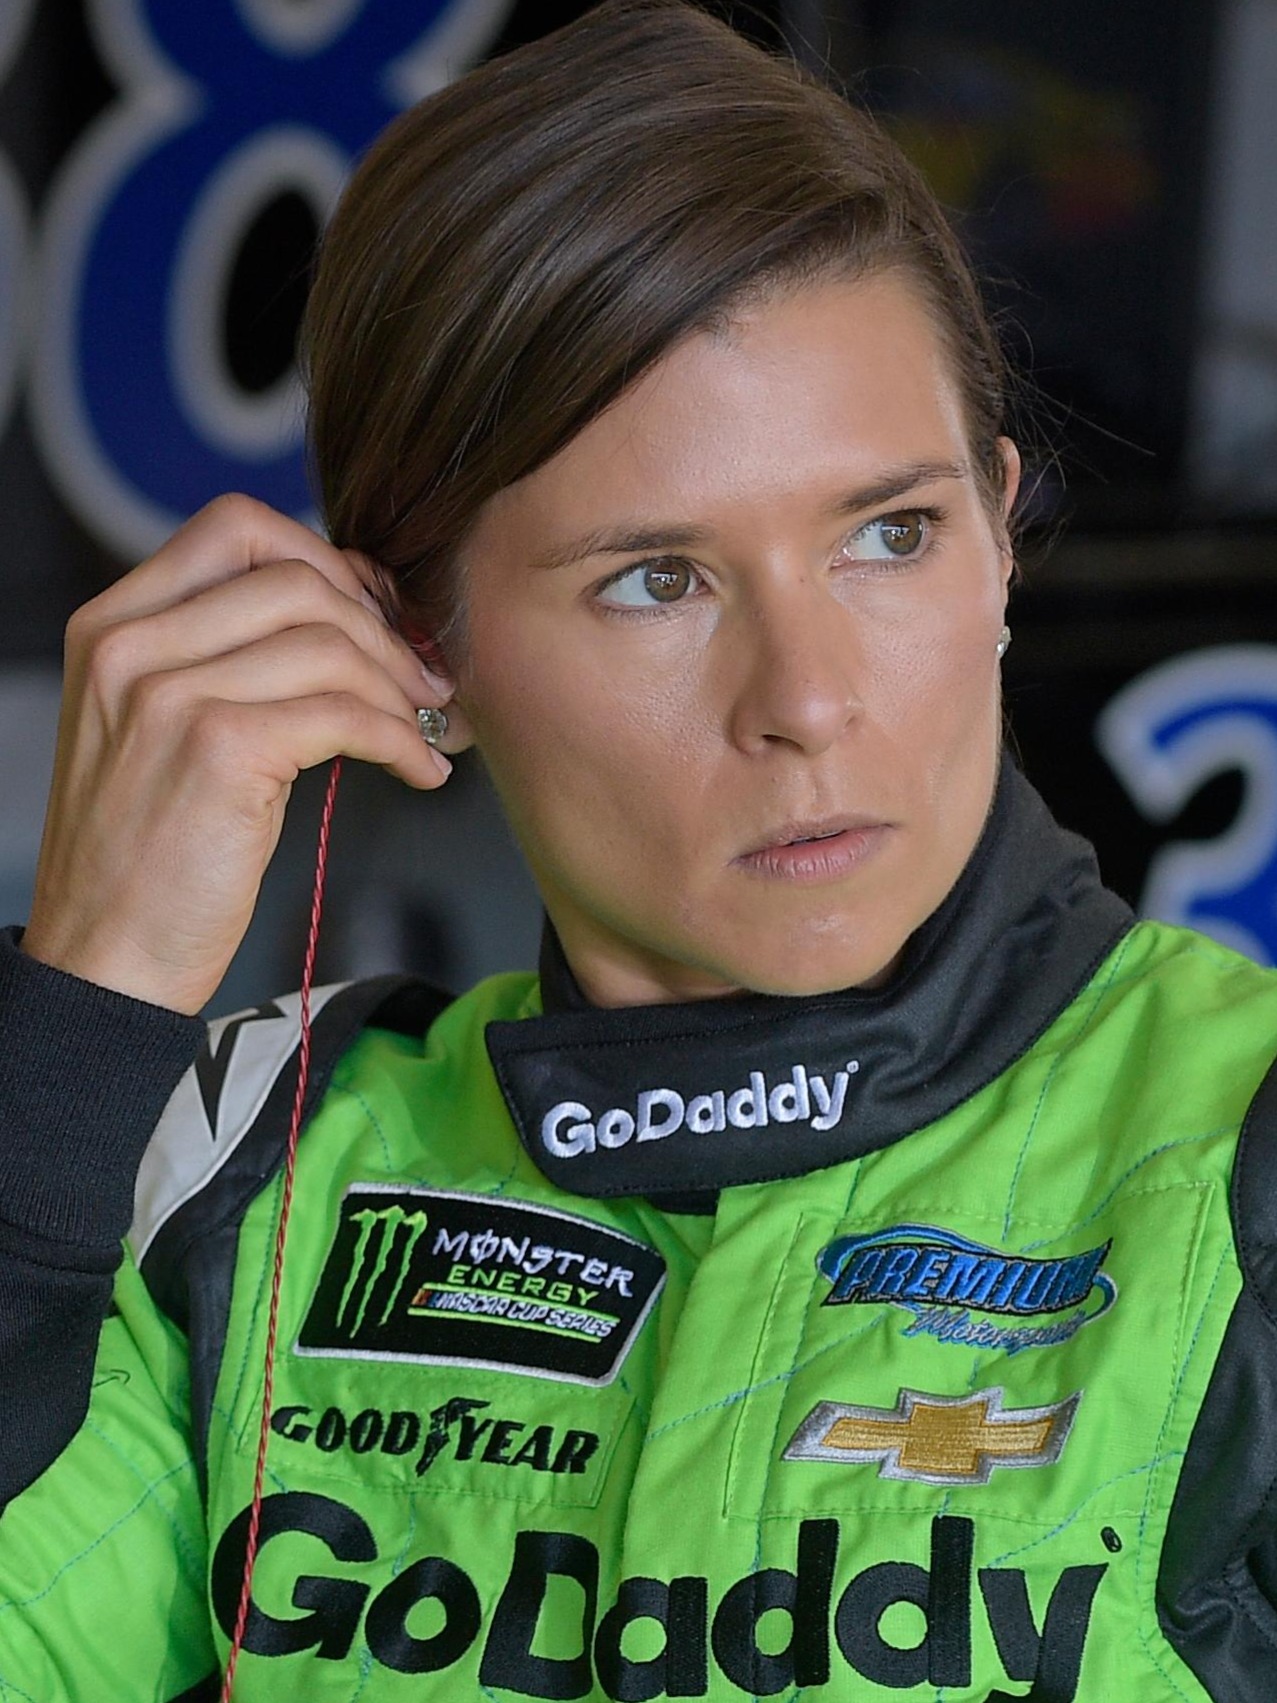 How many top-ten finishes did Danica Patrick achieve in the NASCAR Cup Series?